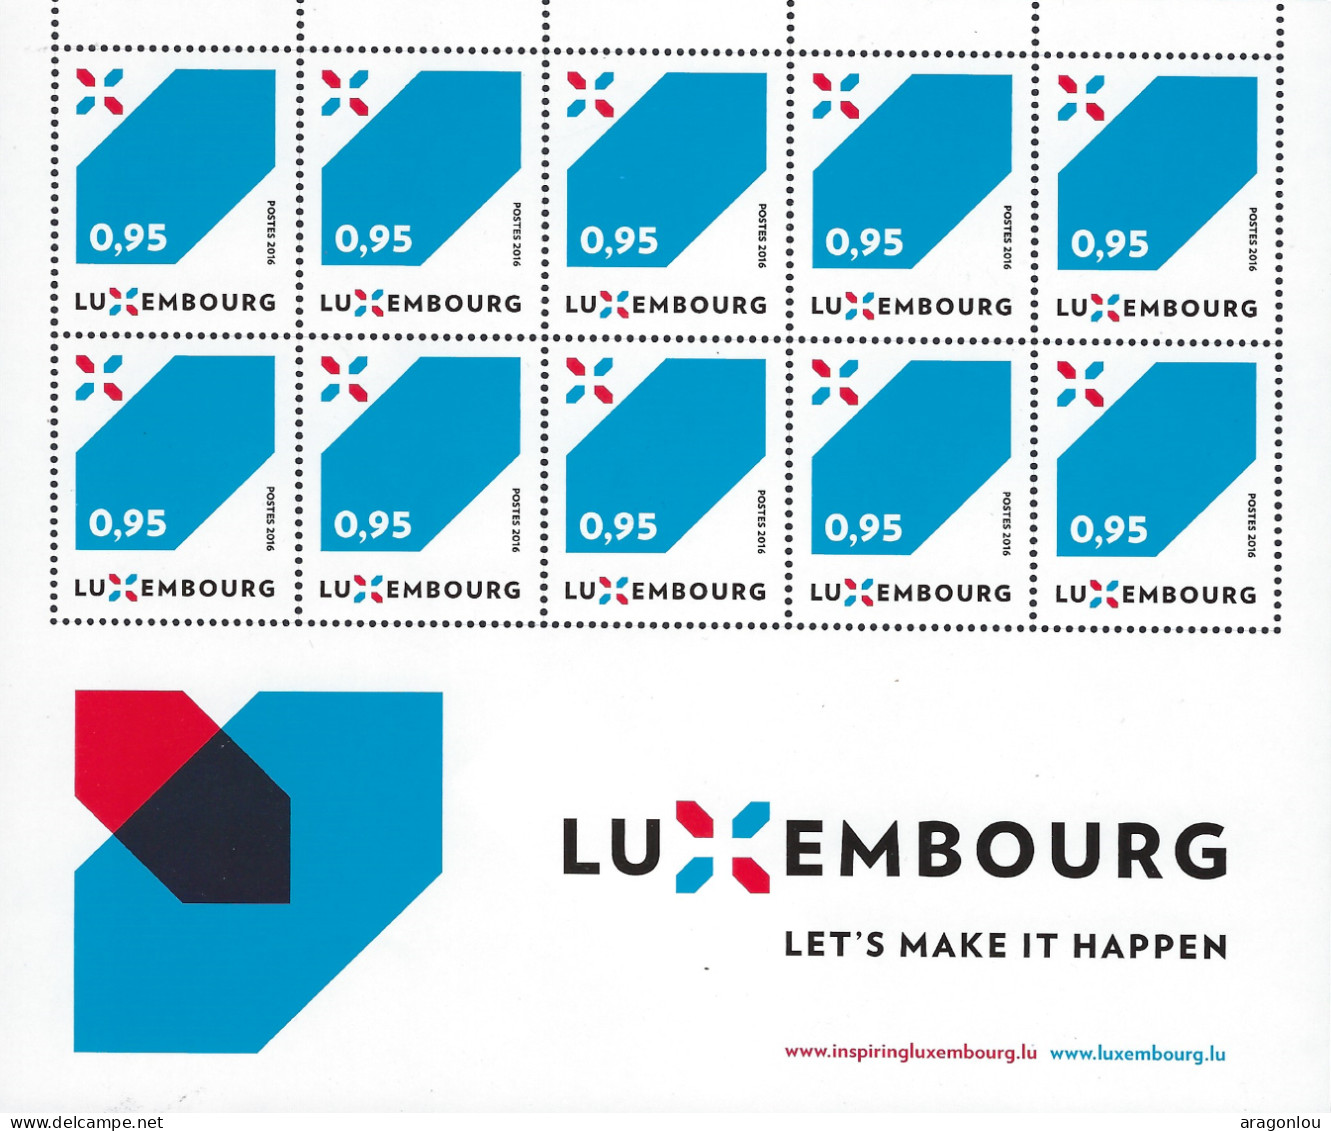 Luxembourg - Luxemburg - Timbres - Feuillet  à  10 Timbres X  1,05 -  2016  LUXEMBOURG  LET'S MAKE IT HAPPEN  MNH** - Blocs & Hojas